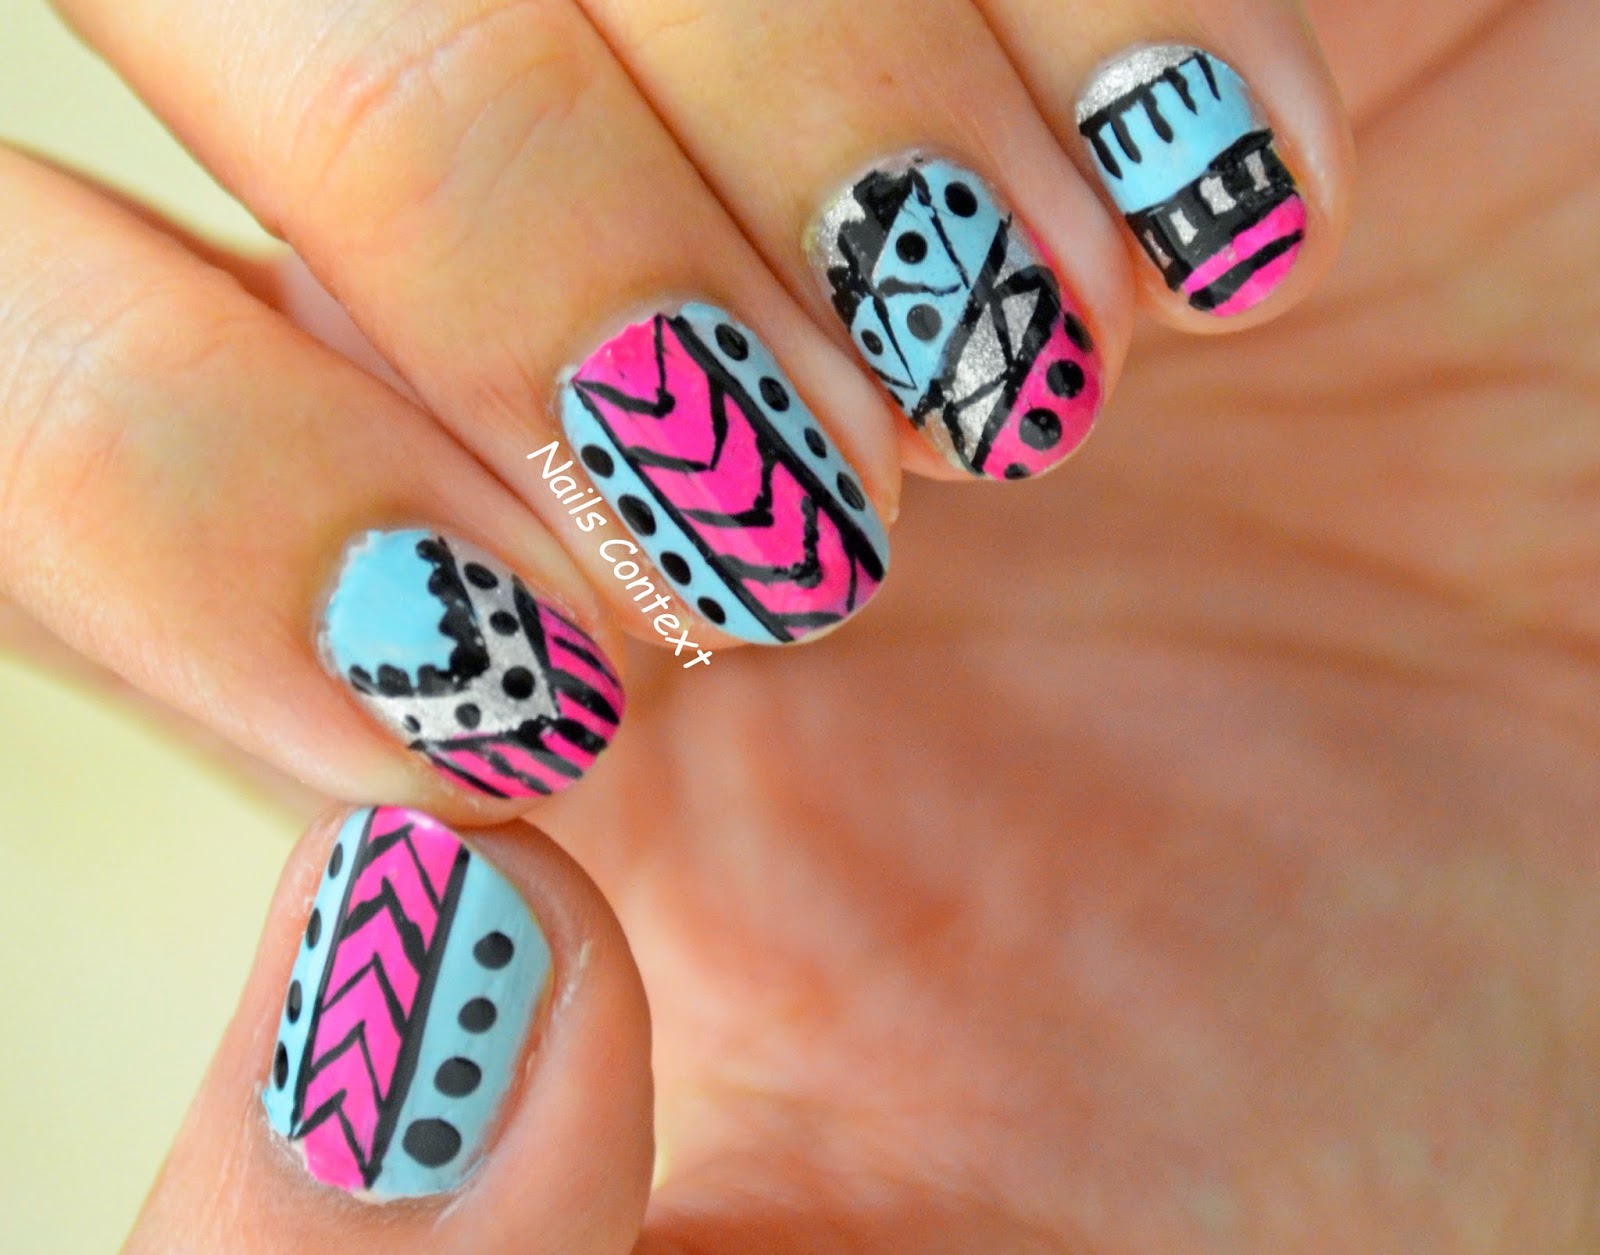 2. Tribal Nail Art Designs for Gel Nails - wide 5